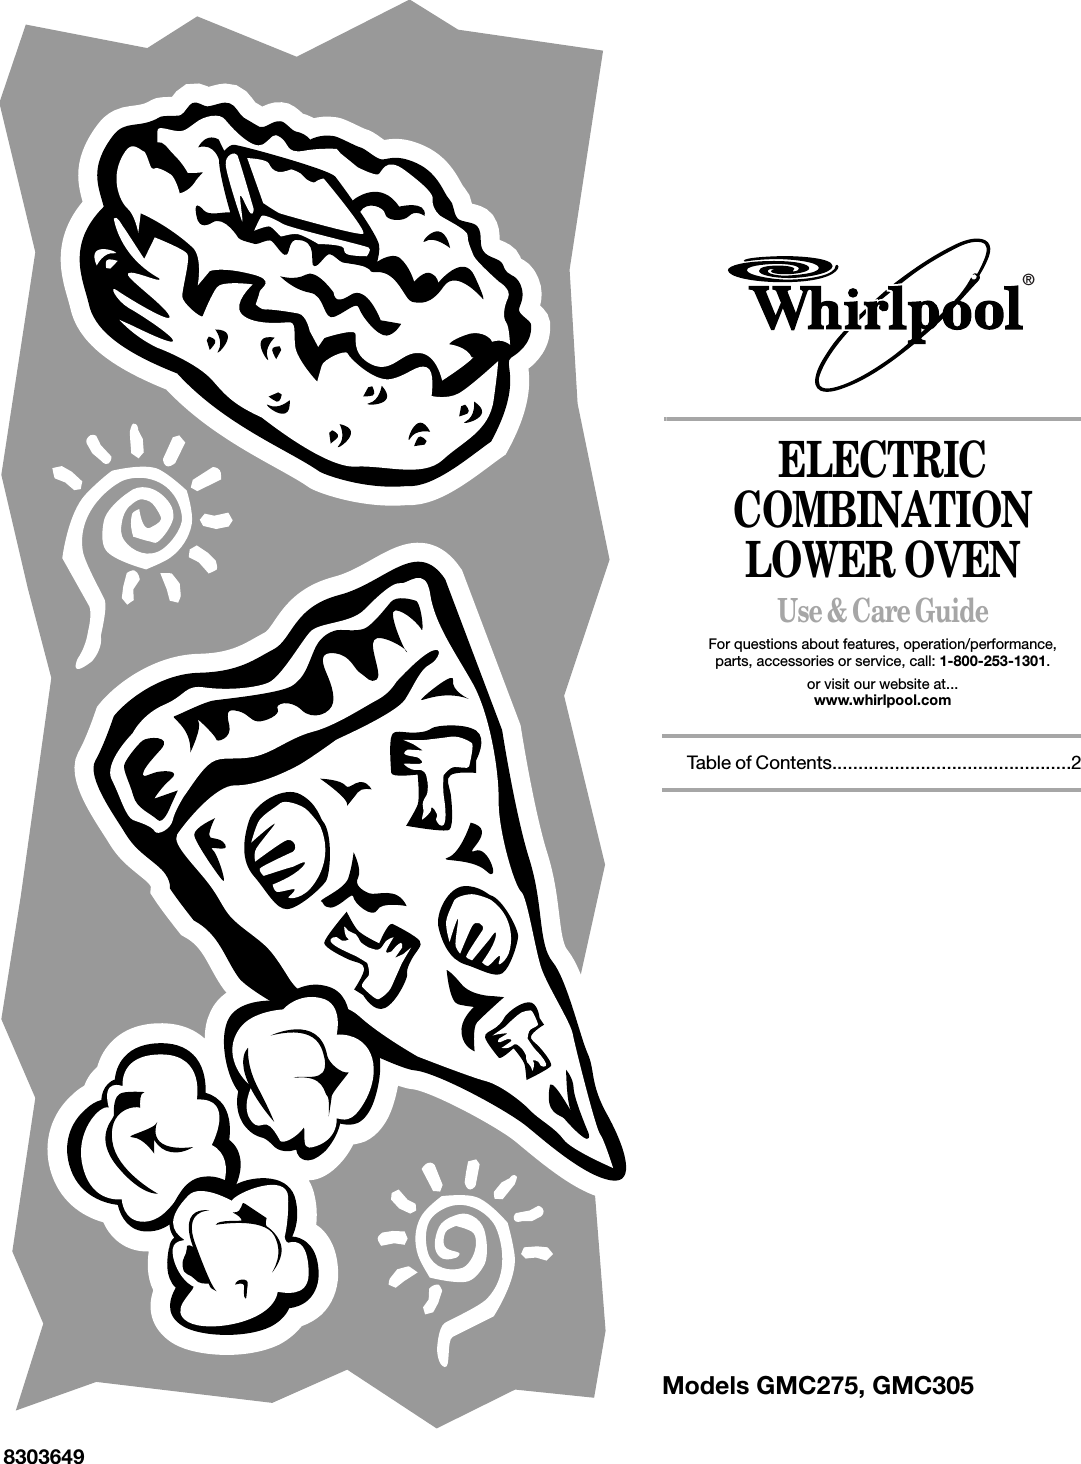 ELECTRICCOMBINATIONLOWER OVENUse &amp; Care GuideFor questions about features, operation/performance,parts, accessories or service, call: 1-800-253-1301.or visit our website at...www.whirlpool.com Table of Contents..............................................2Models GMC275, GMC3058303649®